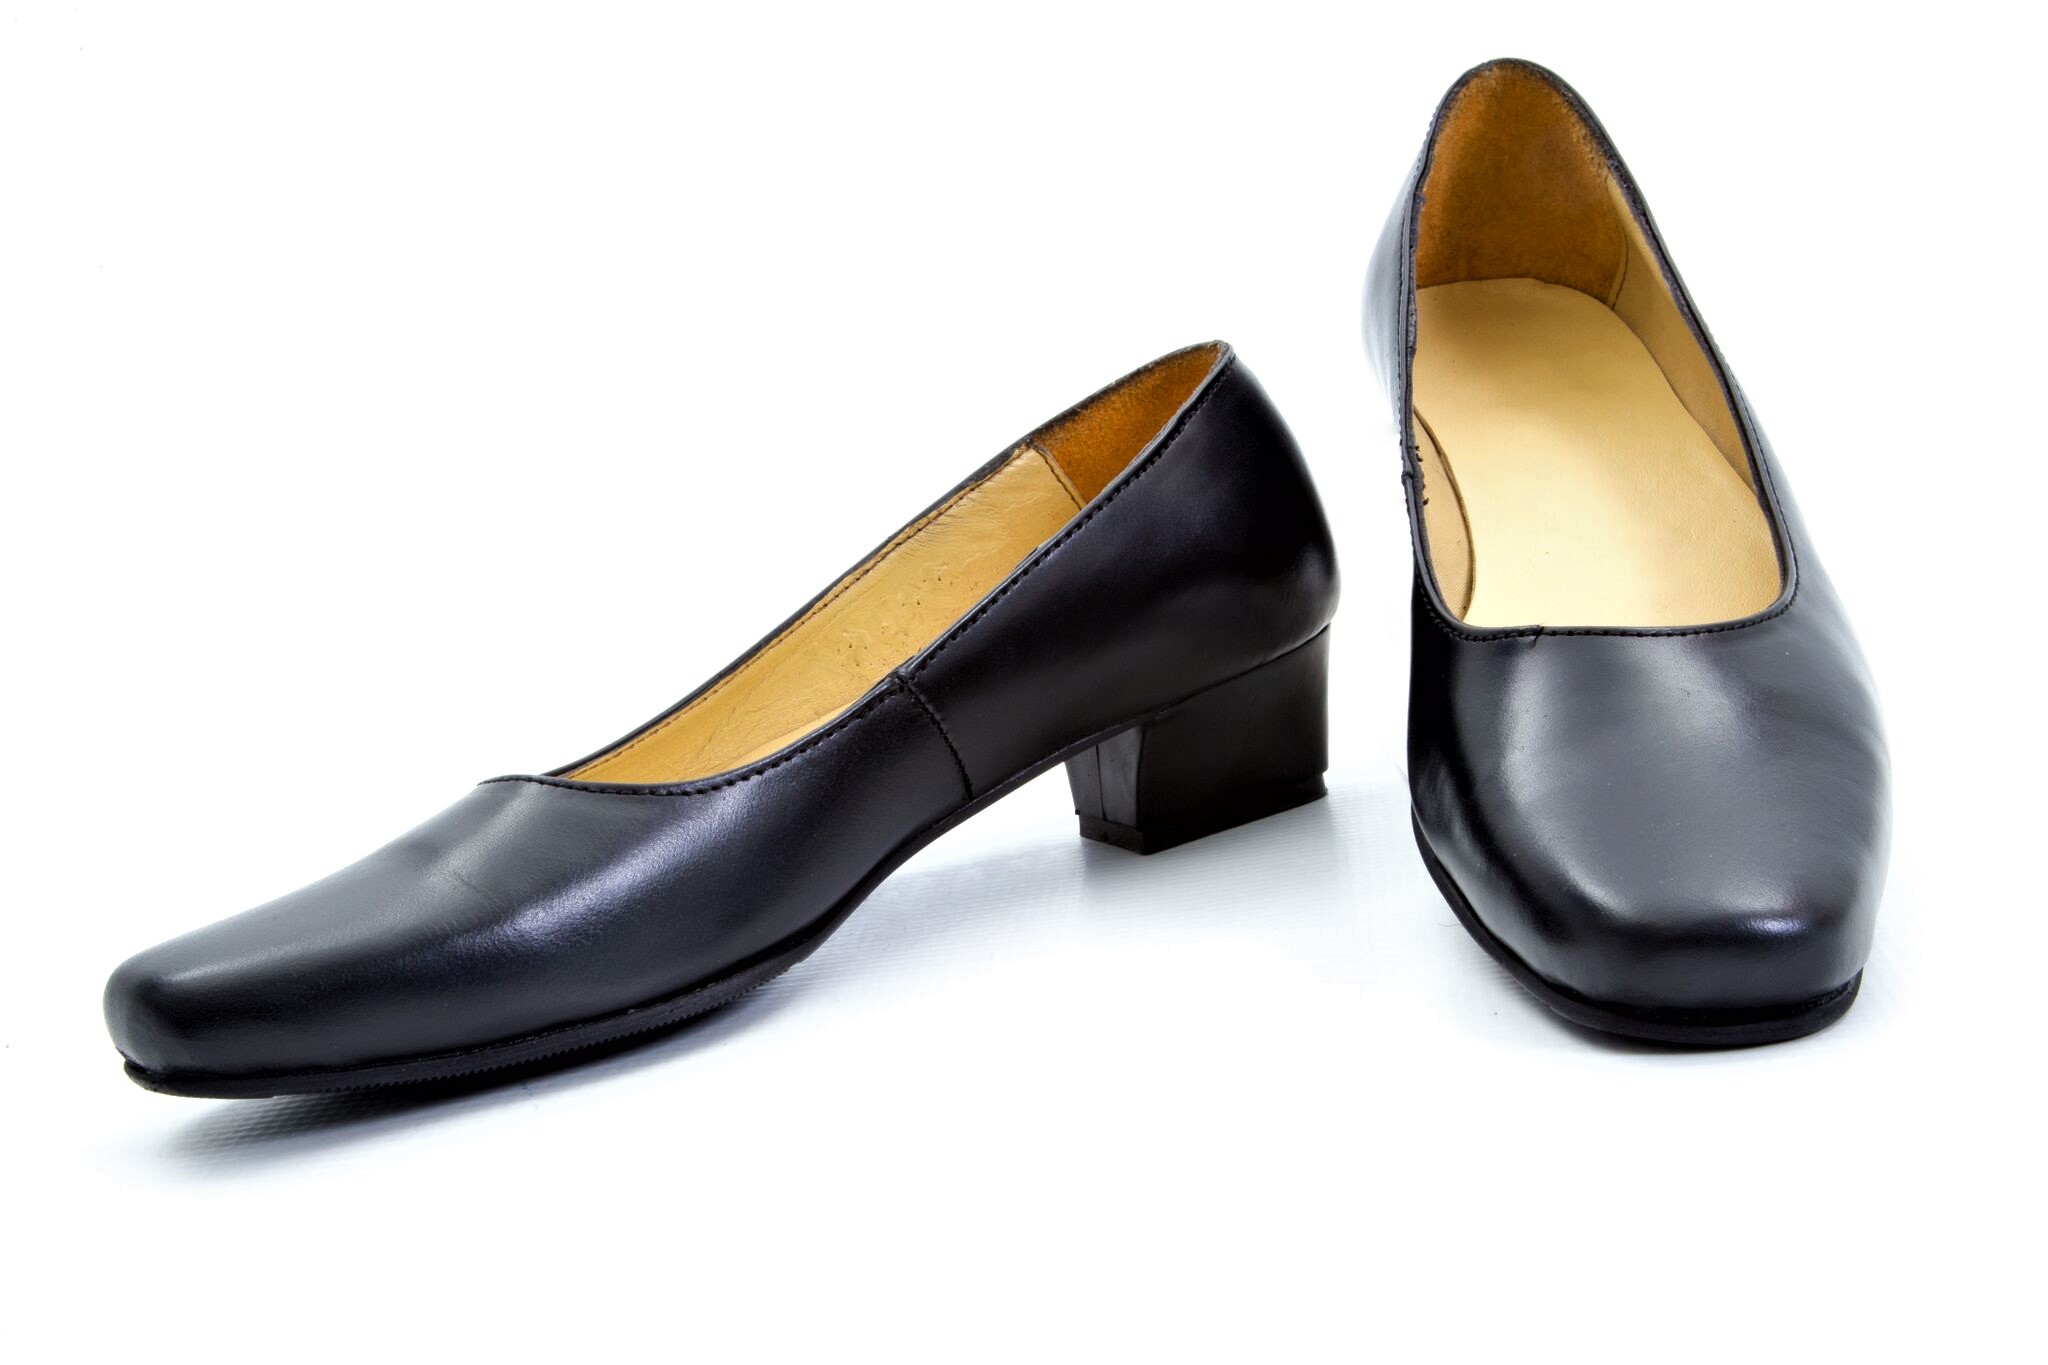 Reduced to Clear: Size 5 1/2 Plain Black Leather Female Court Shoes